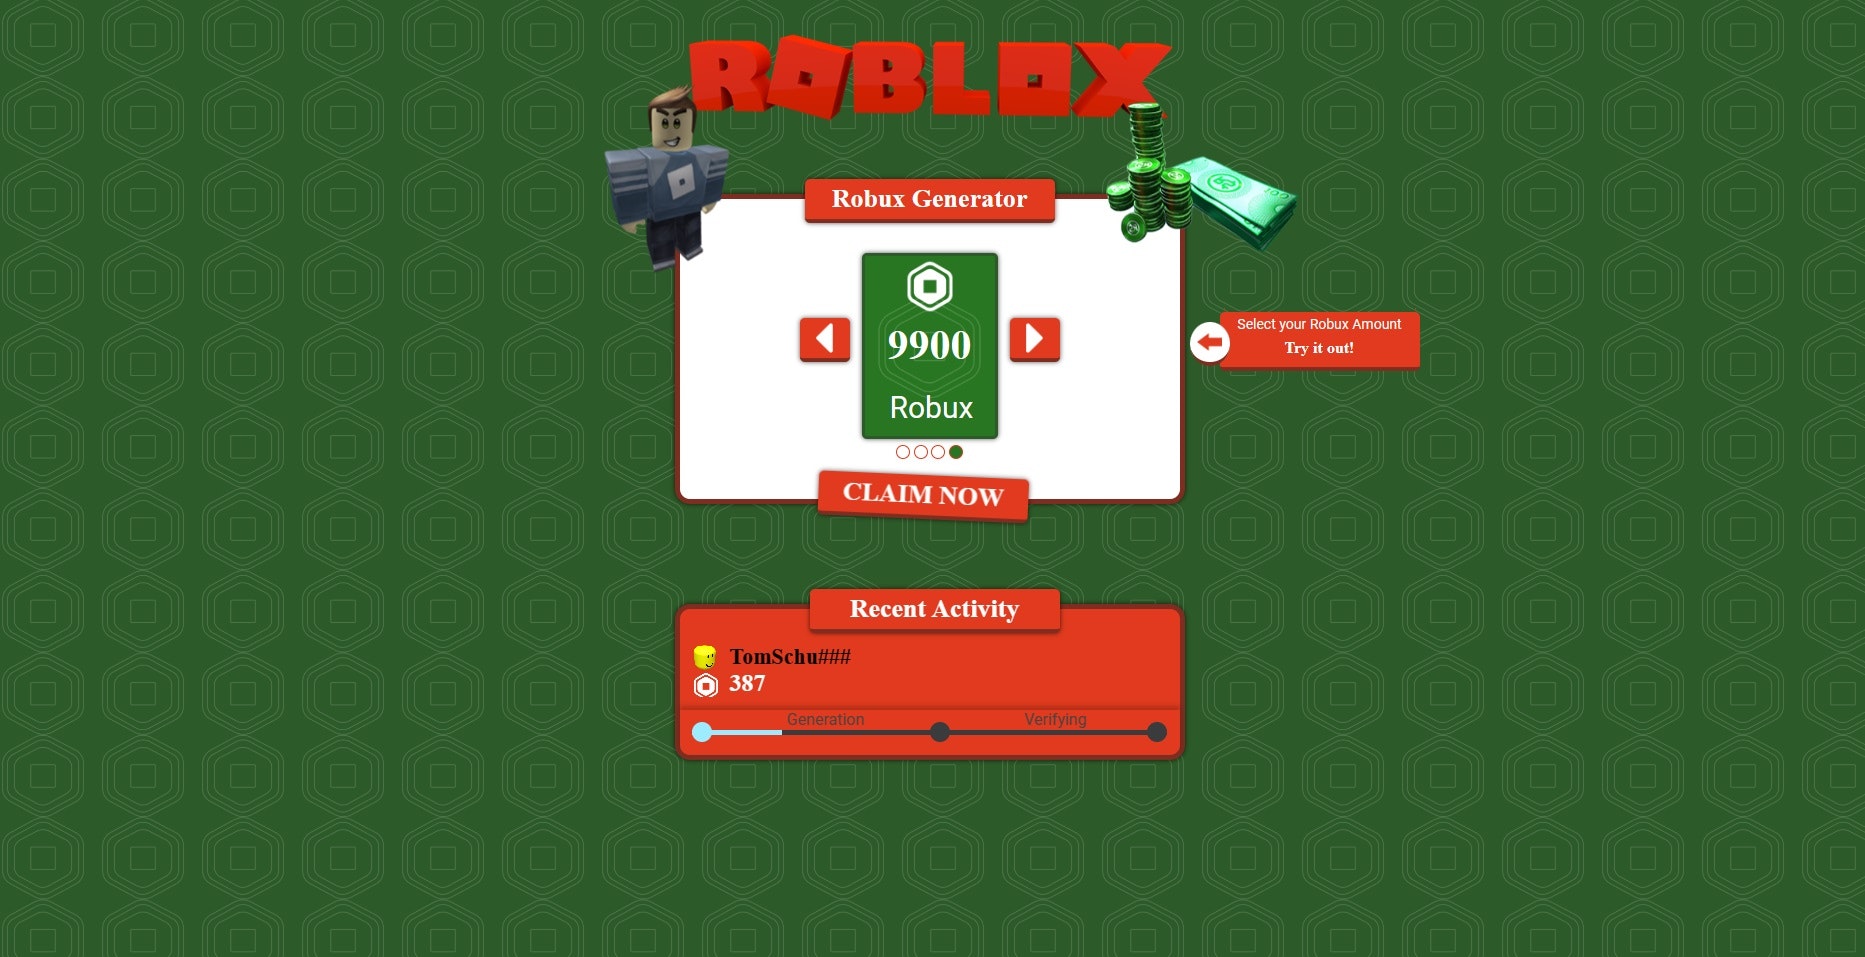 FREE ROBUX GENERATOR UPDATED 2022 ROBLOX FREE ROBUX HACK CODES